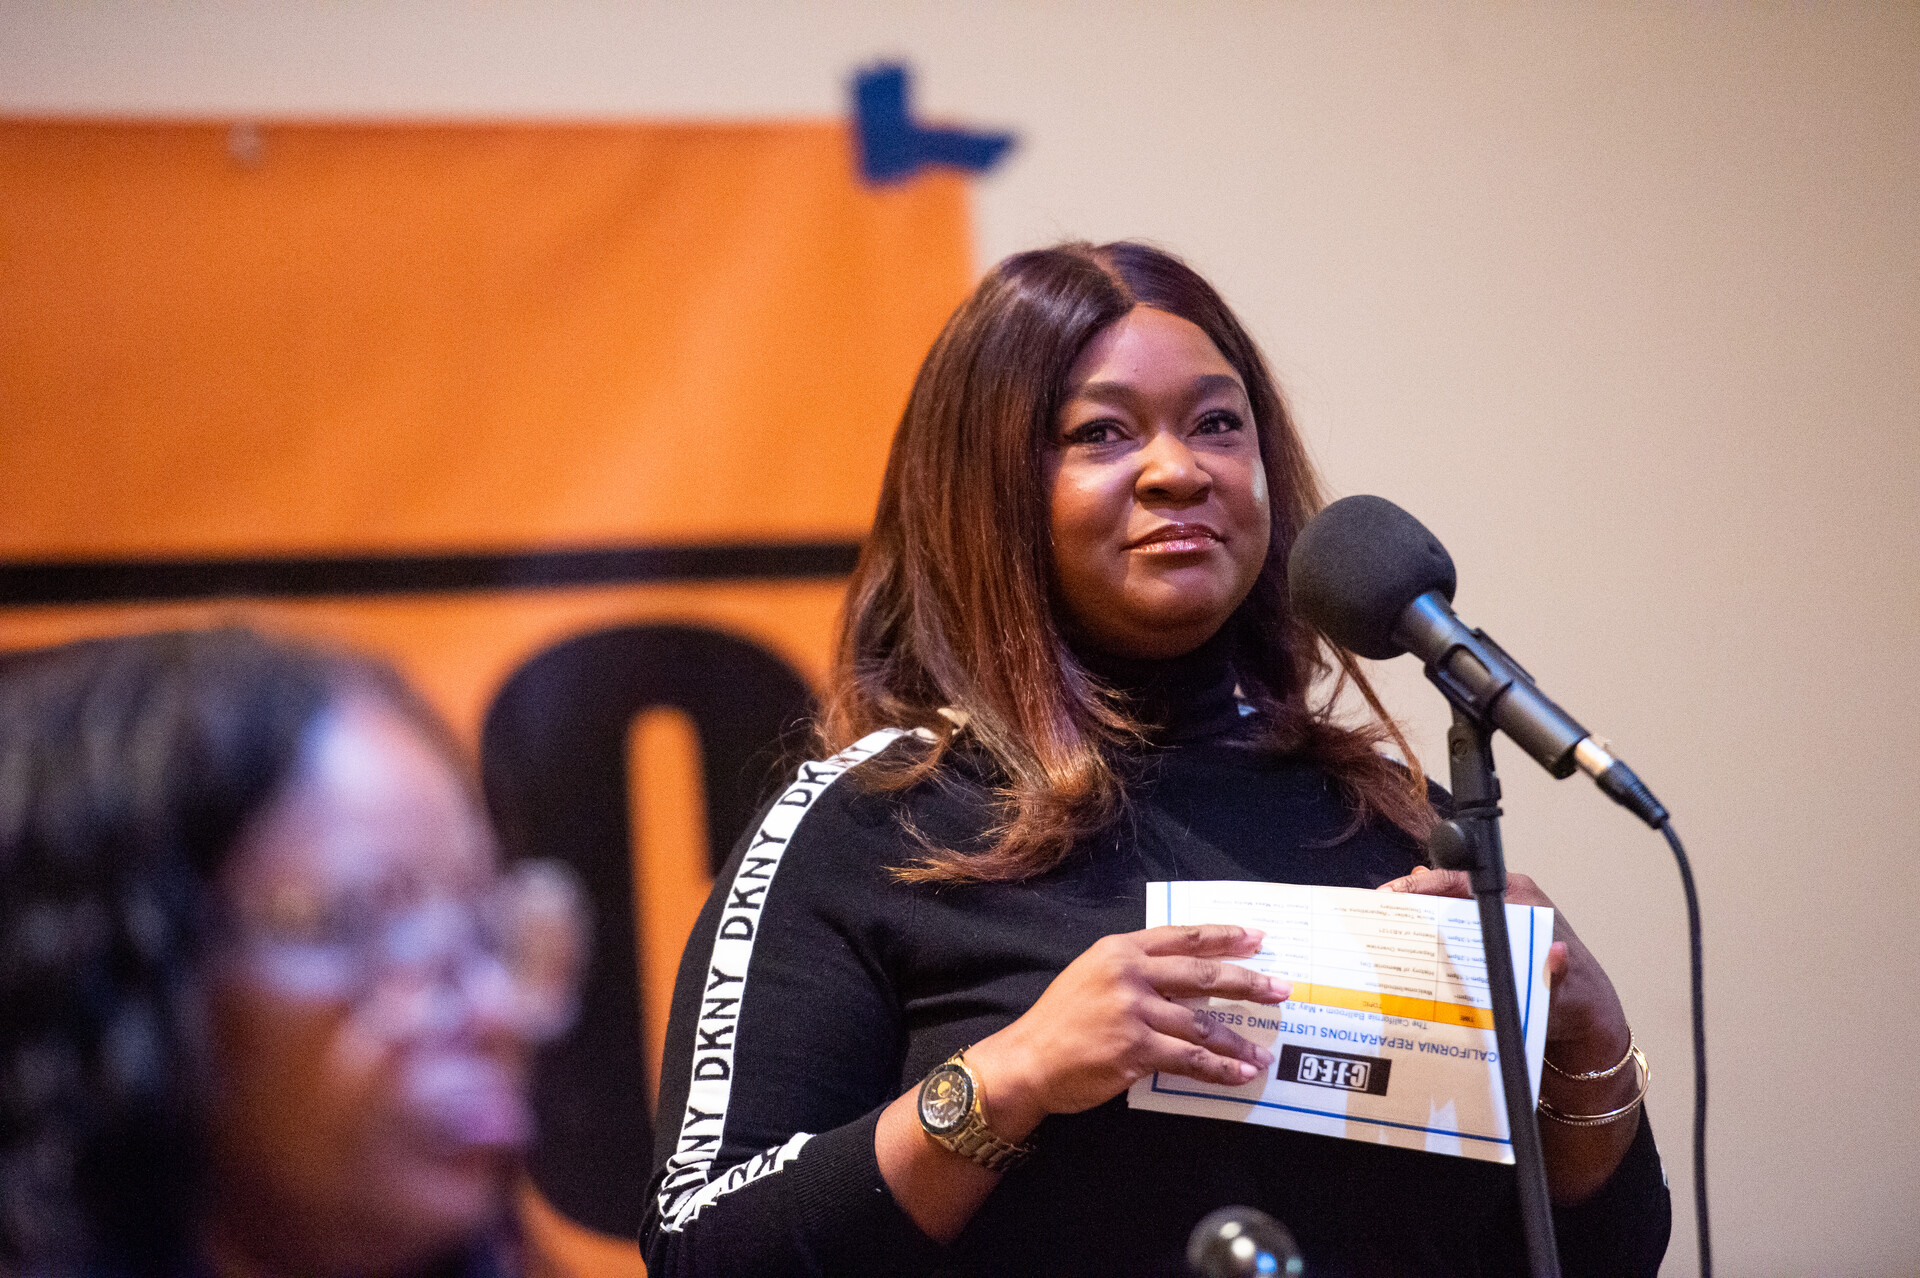 A Black woman looks towards the camera while holding a card standing in front of a microphone